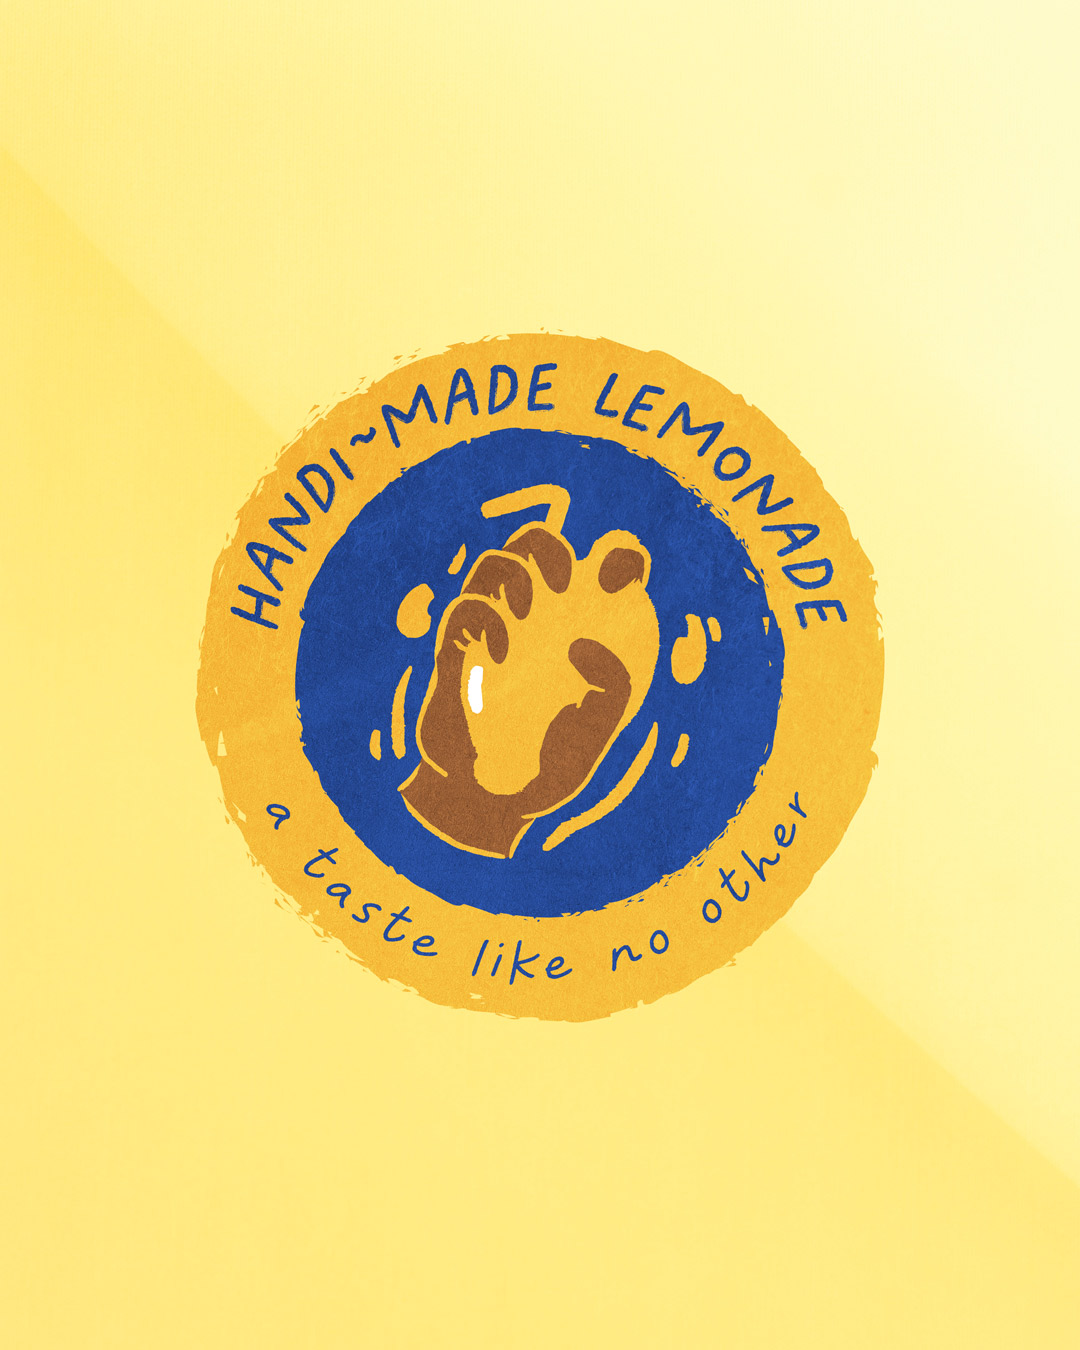 chloe v designs handi made lemonade logo, pictured is a hand squeezing a lemon, the lemon has a straw in it, in a circle around the image is handi made lemonade a taste like no other